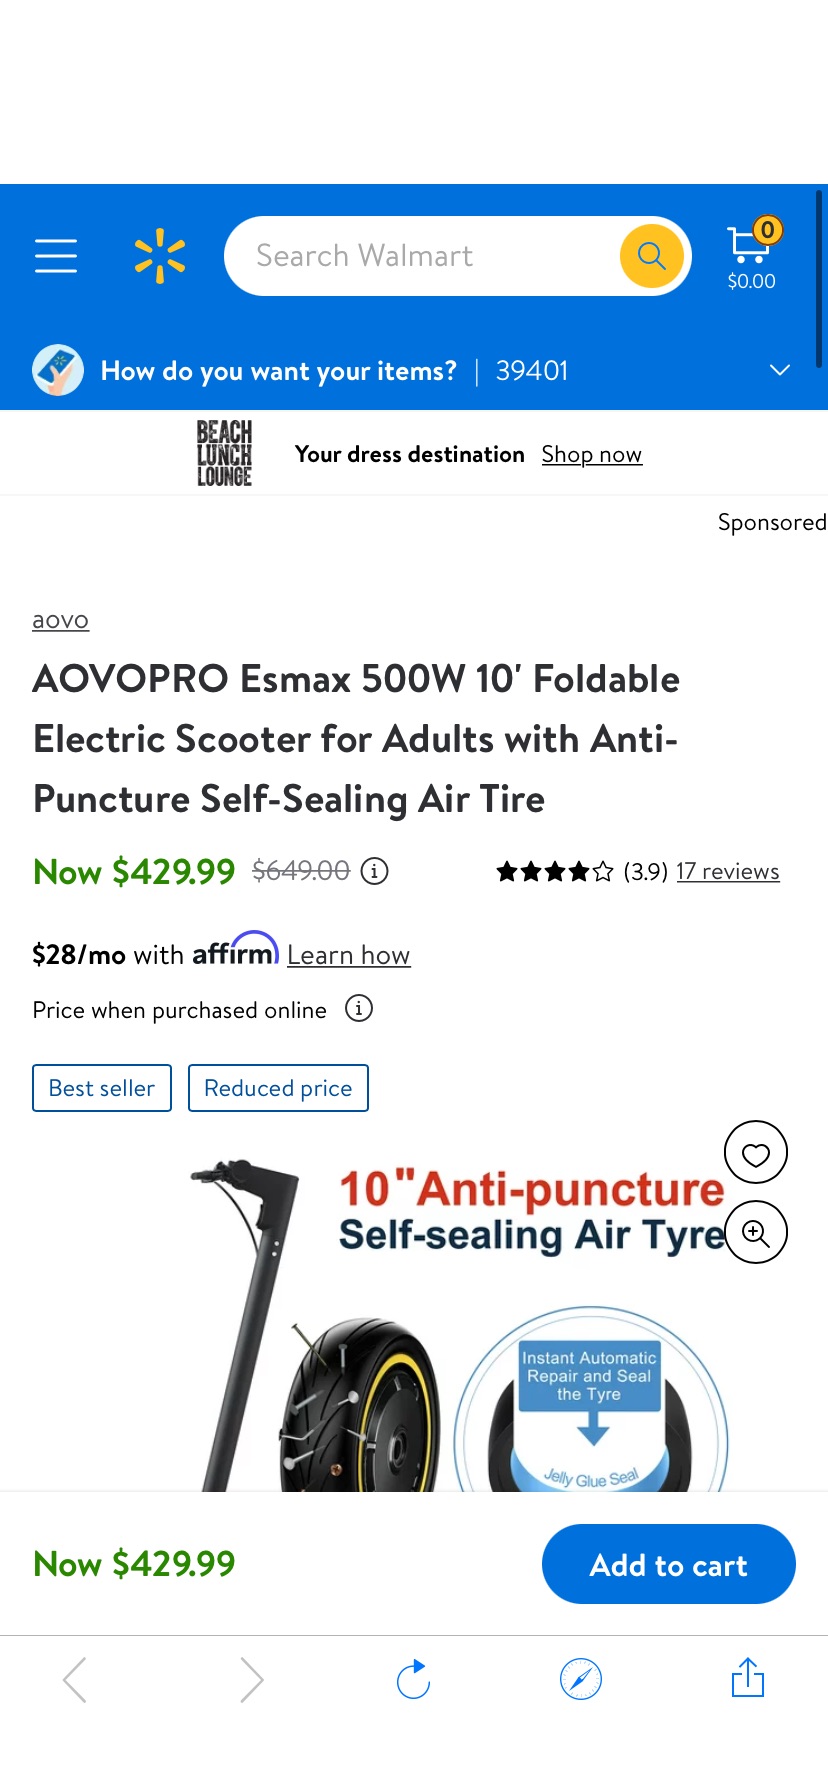 AOVOPRO Esmax 500W 10' Foldable Electric Scooter for Adults with Anti-Puncture Self-Sealing Air Tire - Walmart.com